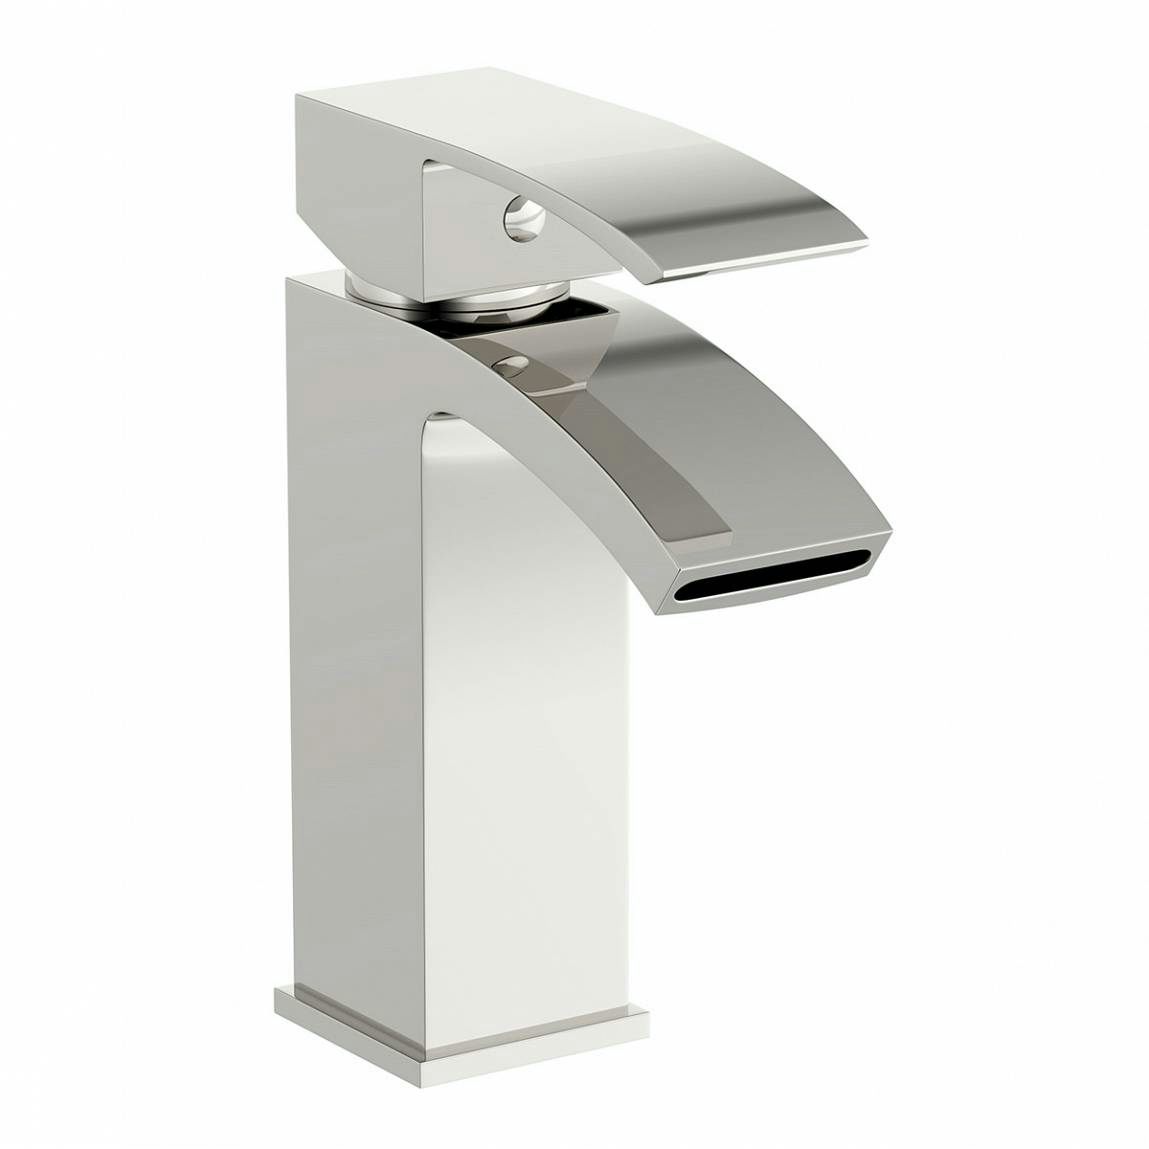 Orchard Wye basin mixer tap with slotted waste